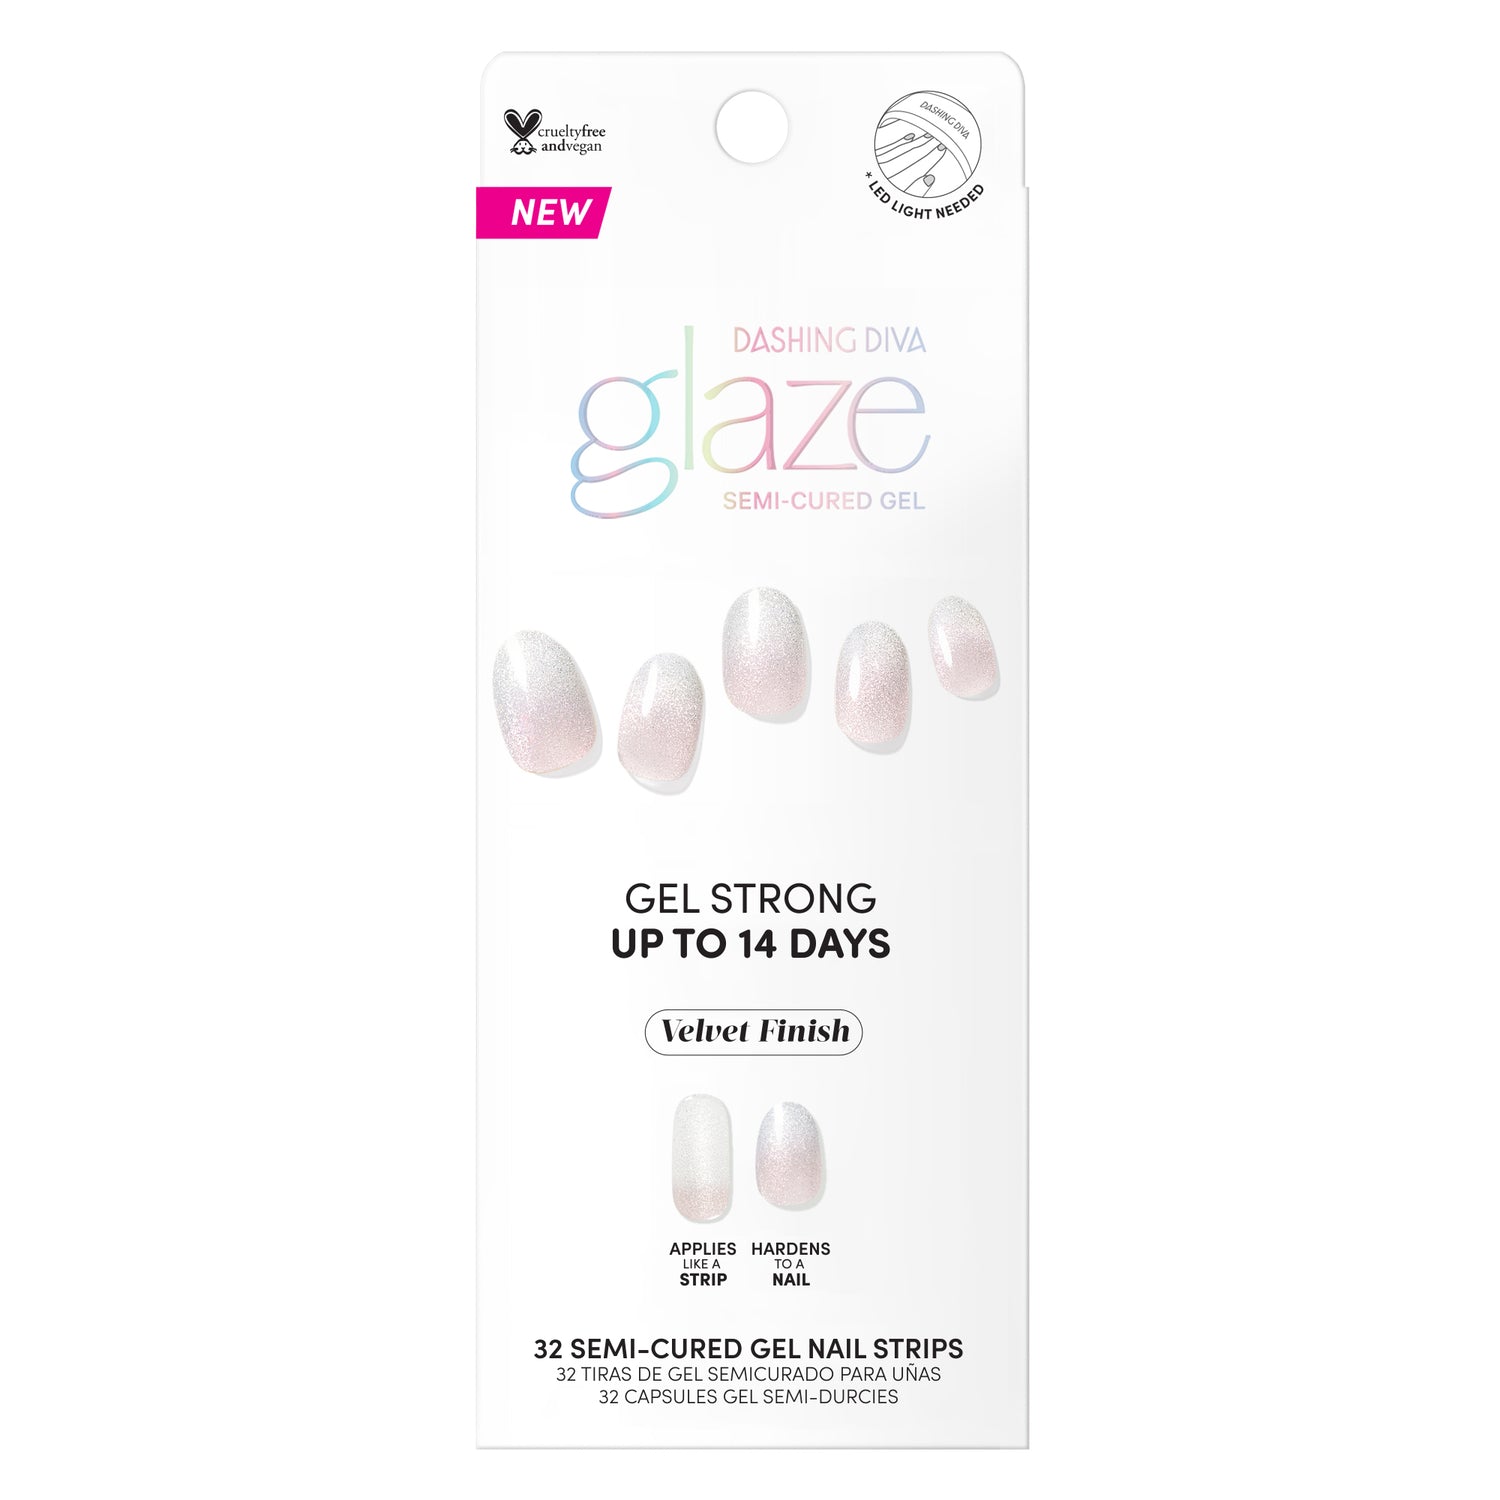 Semi-cured white ombré gel nail strips featuring velvet shimmer with mega volume and maximum shine.